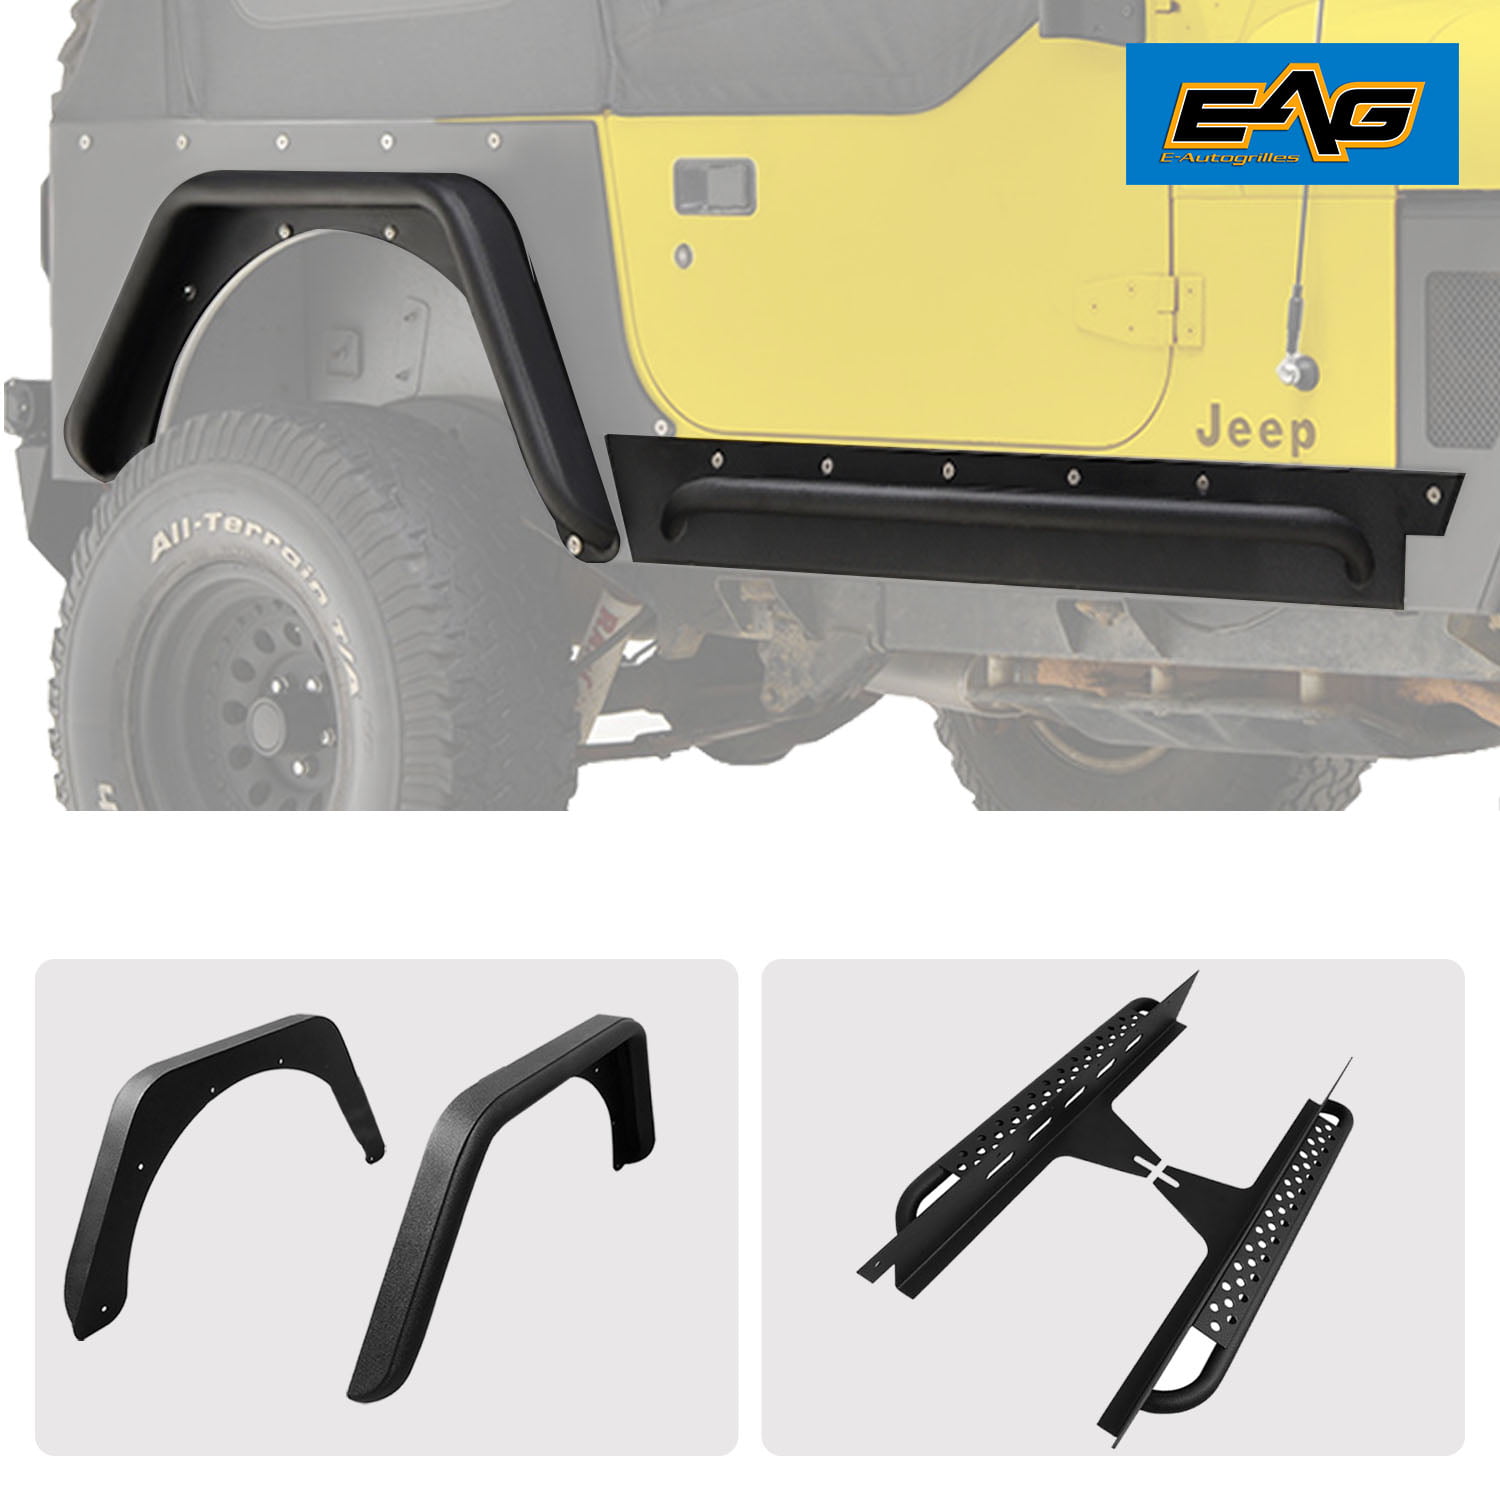 EAG Rear Corner Guard Rock Metal a Pair Armor Fit for 87-96 Jeep Wrangler YJ 